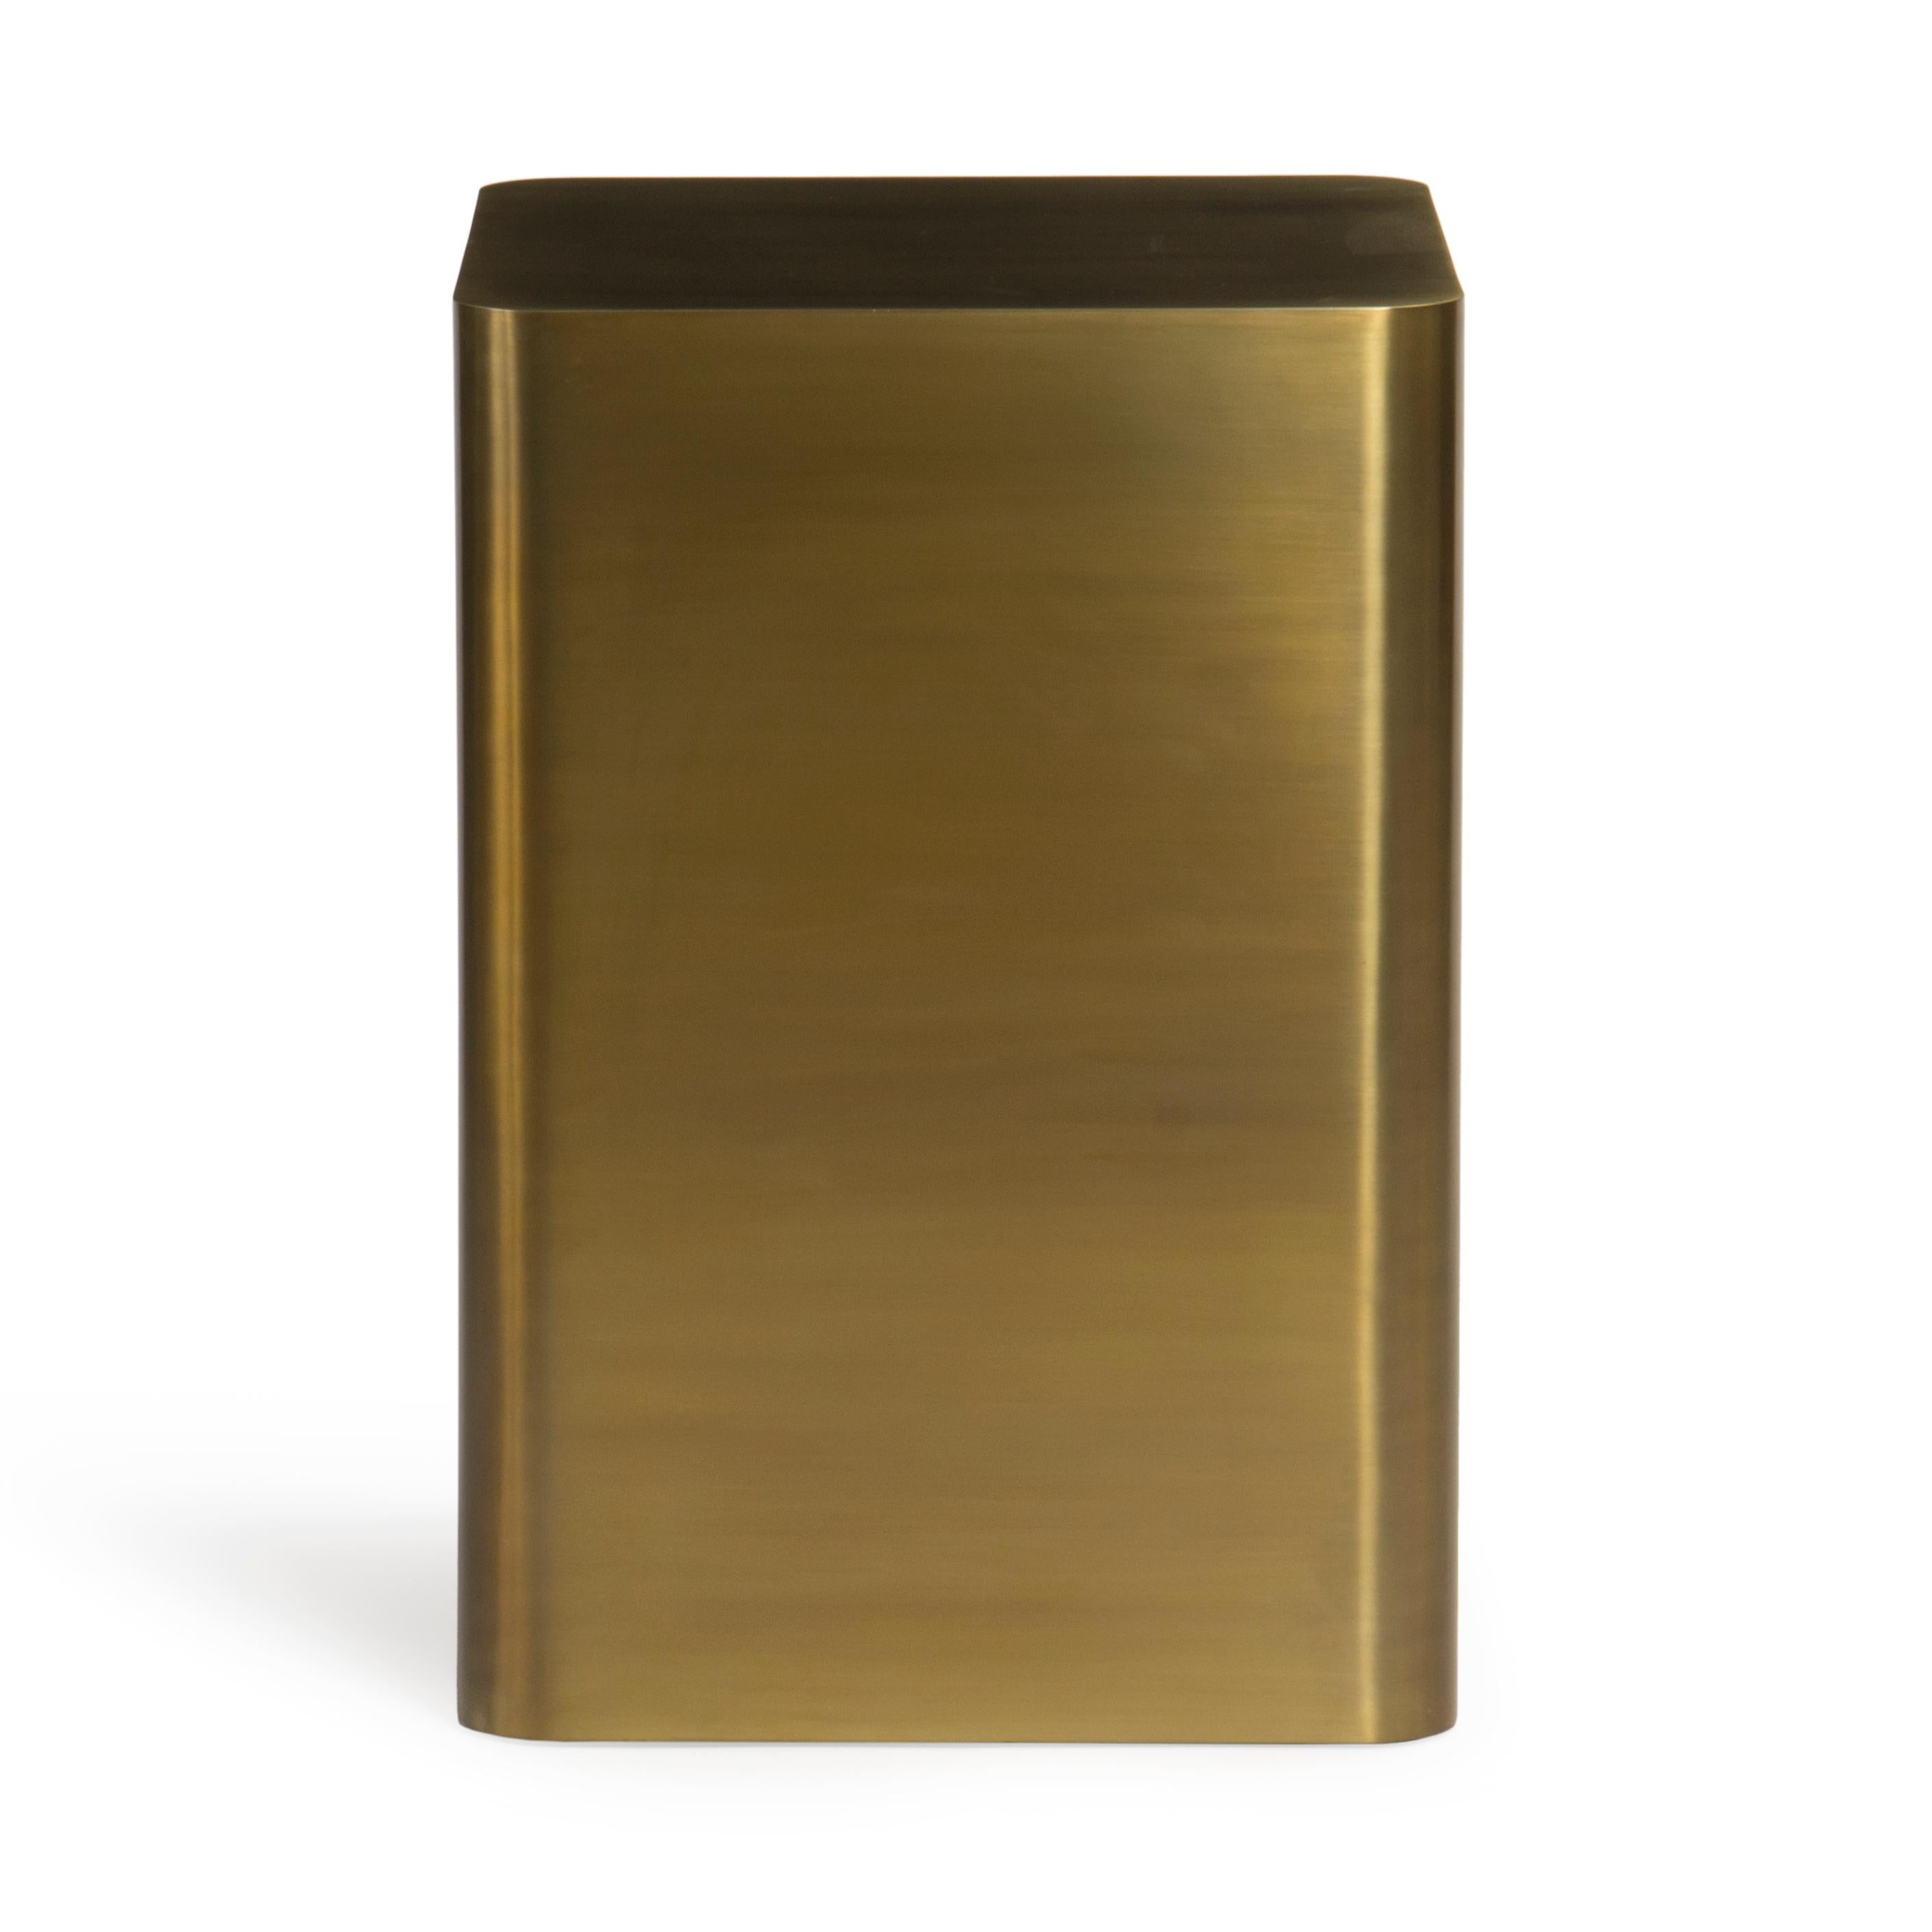 A square shaped brass pedestal with rounded corners. Made in the USA, circa 1970s.